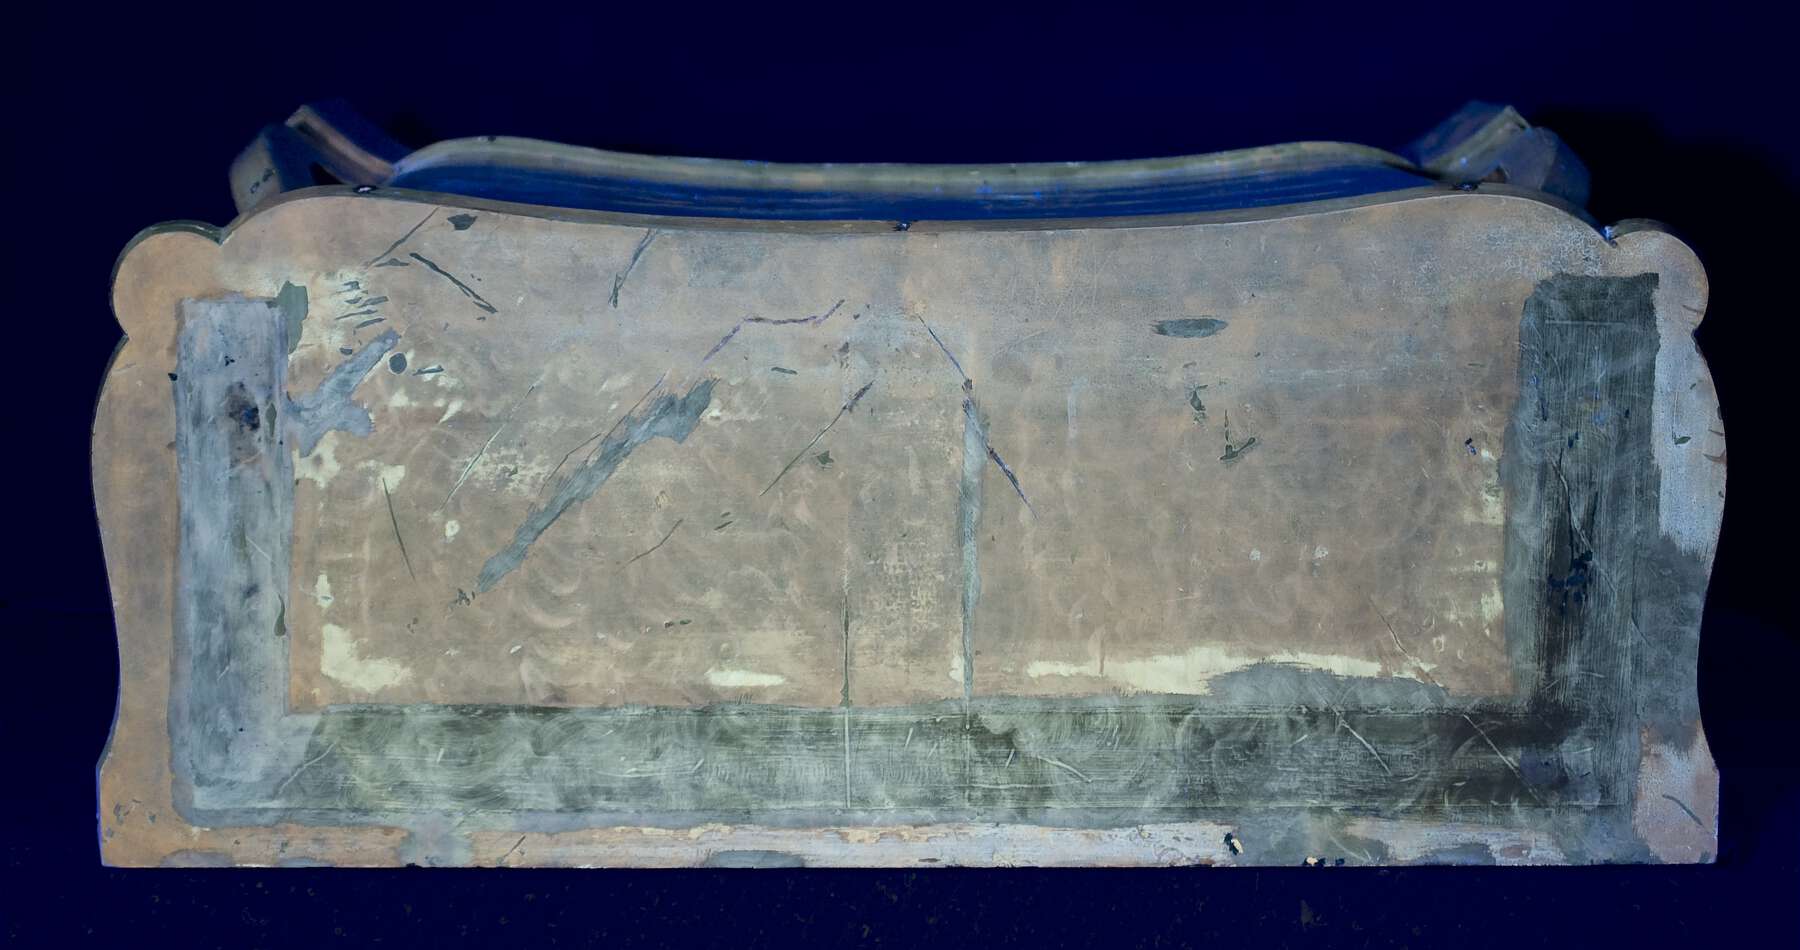 top of the bottom register as seen under ultraviolet light, revealing a c-shaped patch of veneer alongside the back and sides of the serre-papiers